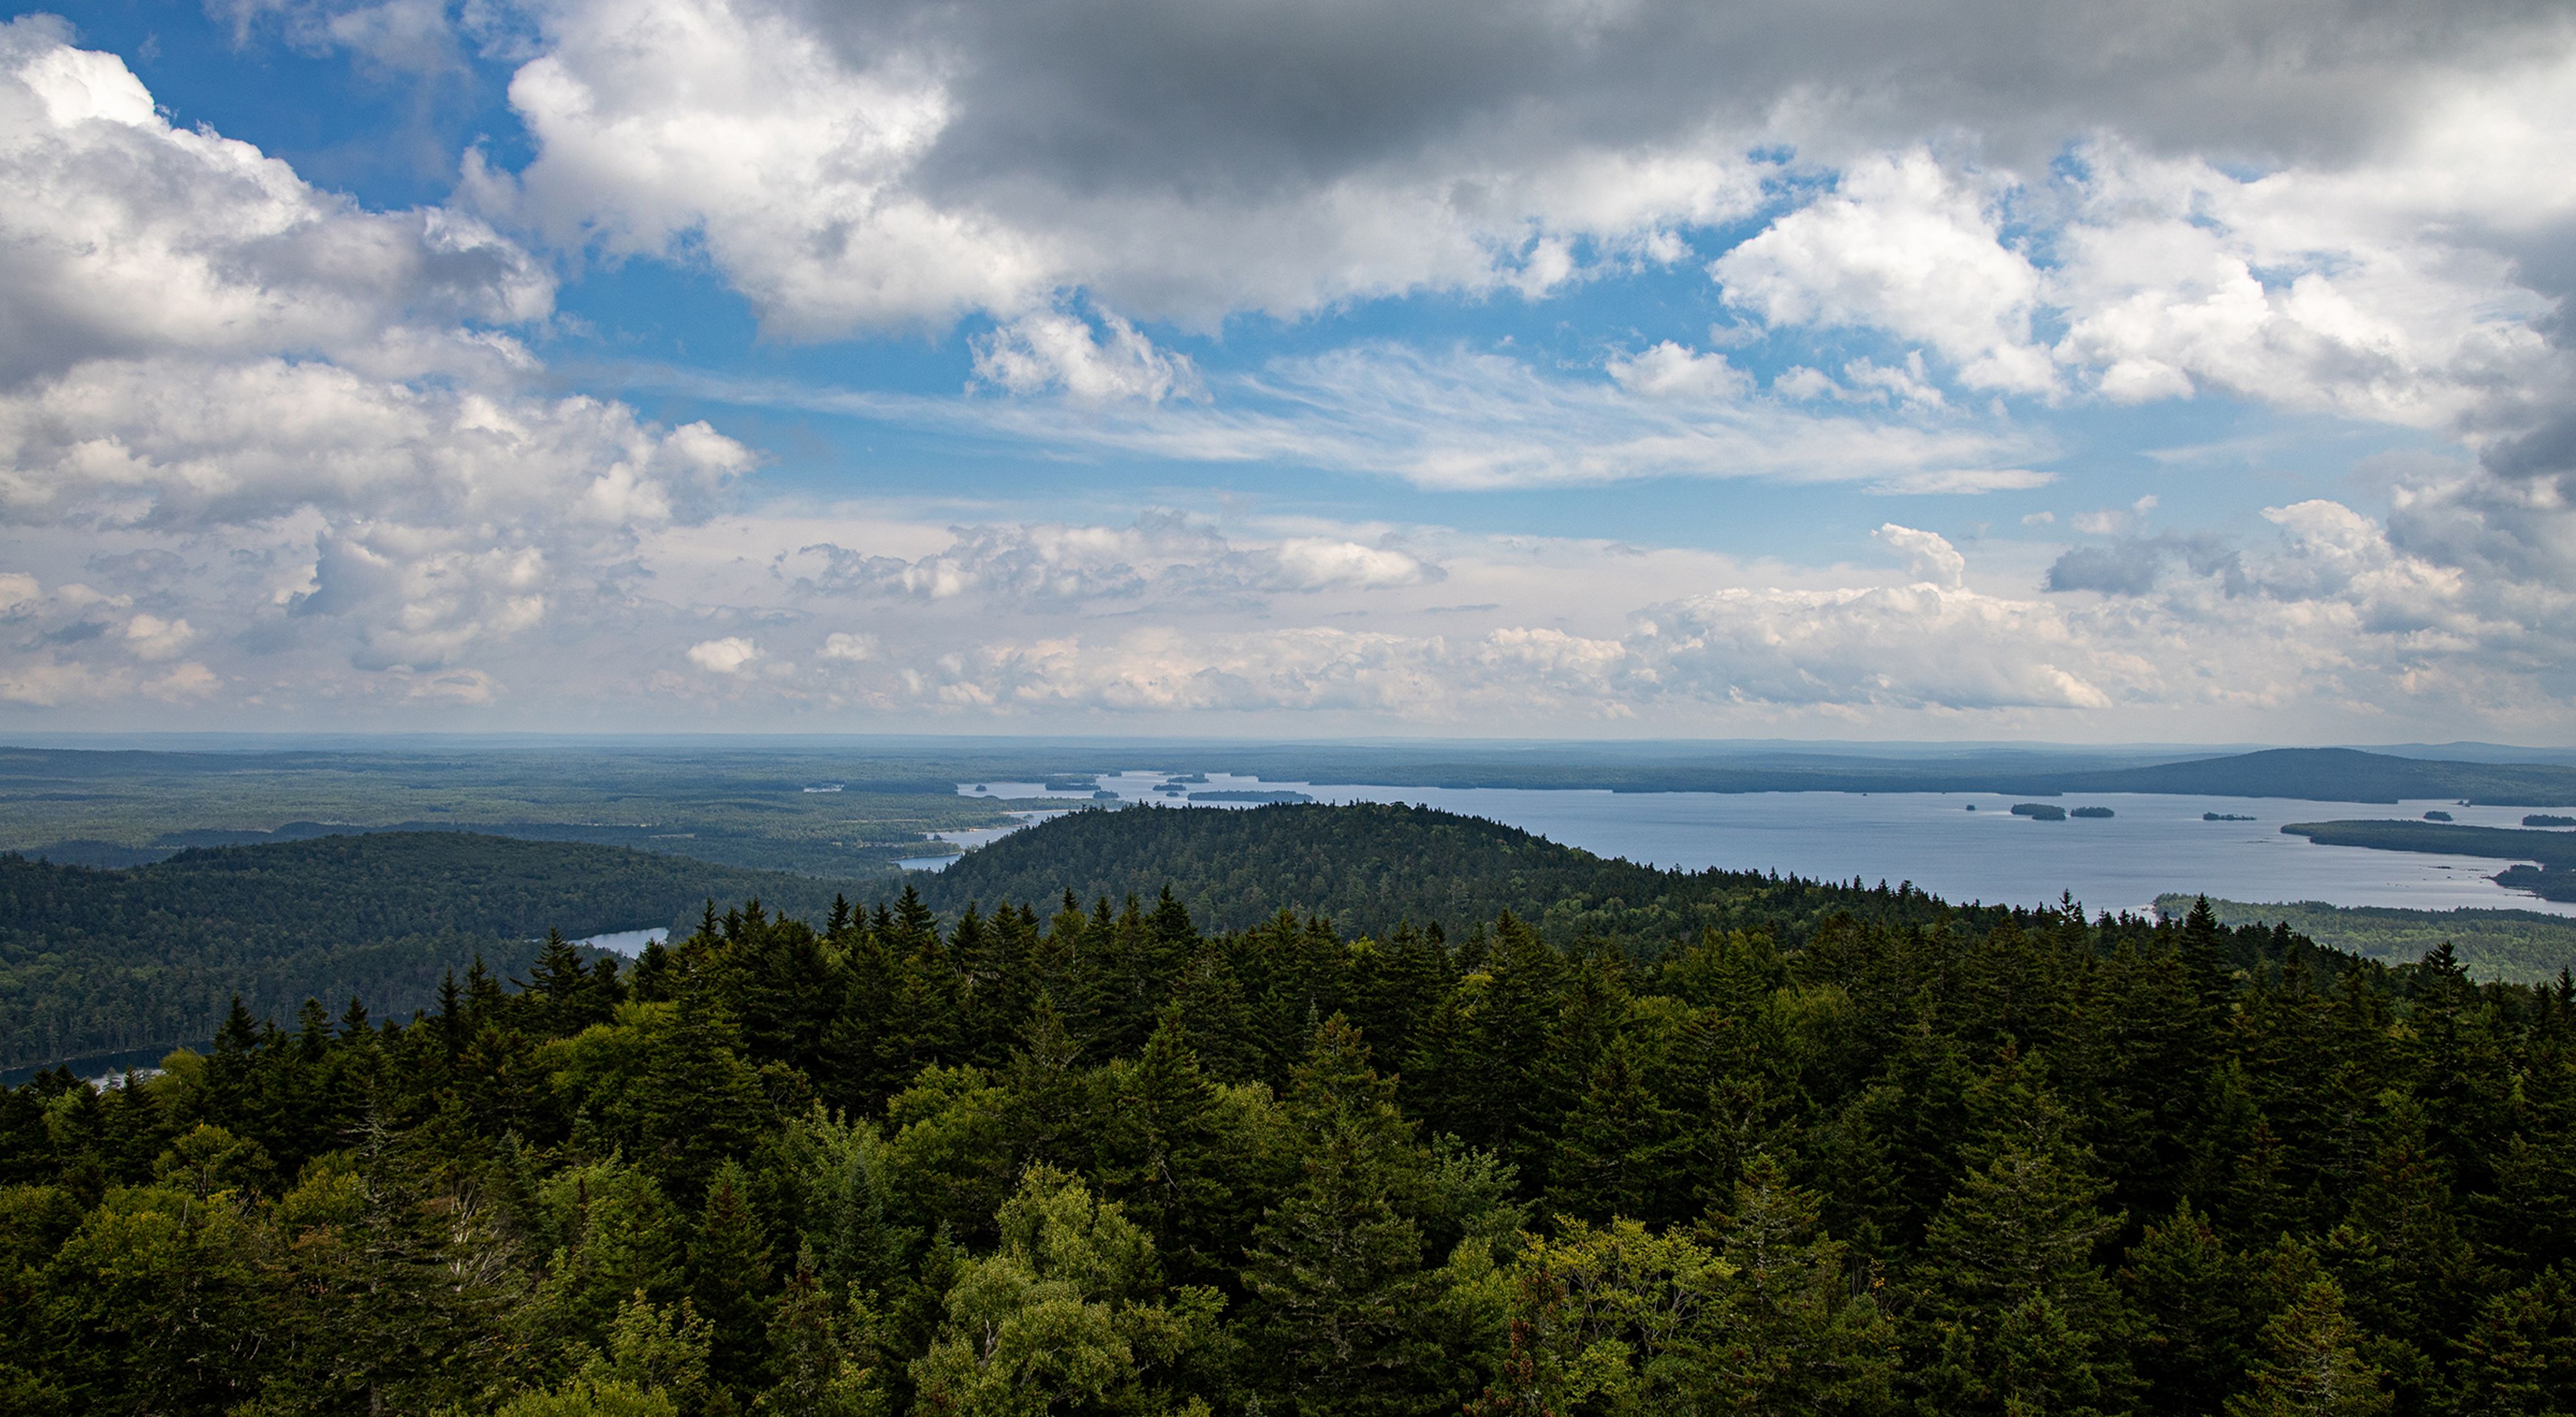 A view of forest and lakes from atop a lush green mountain.